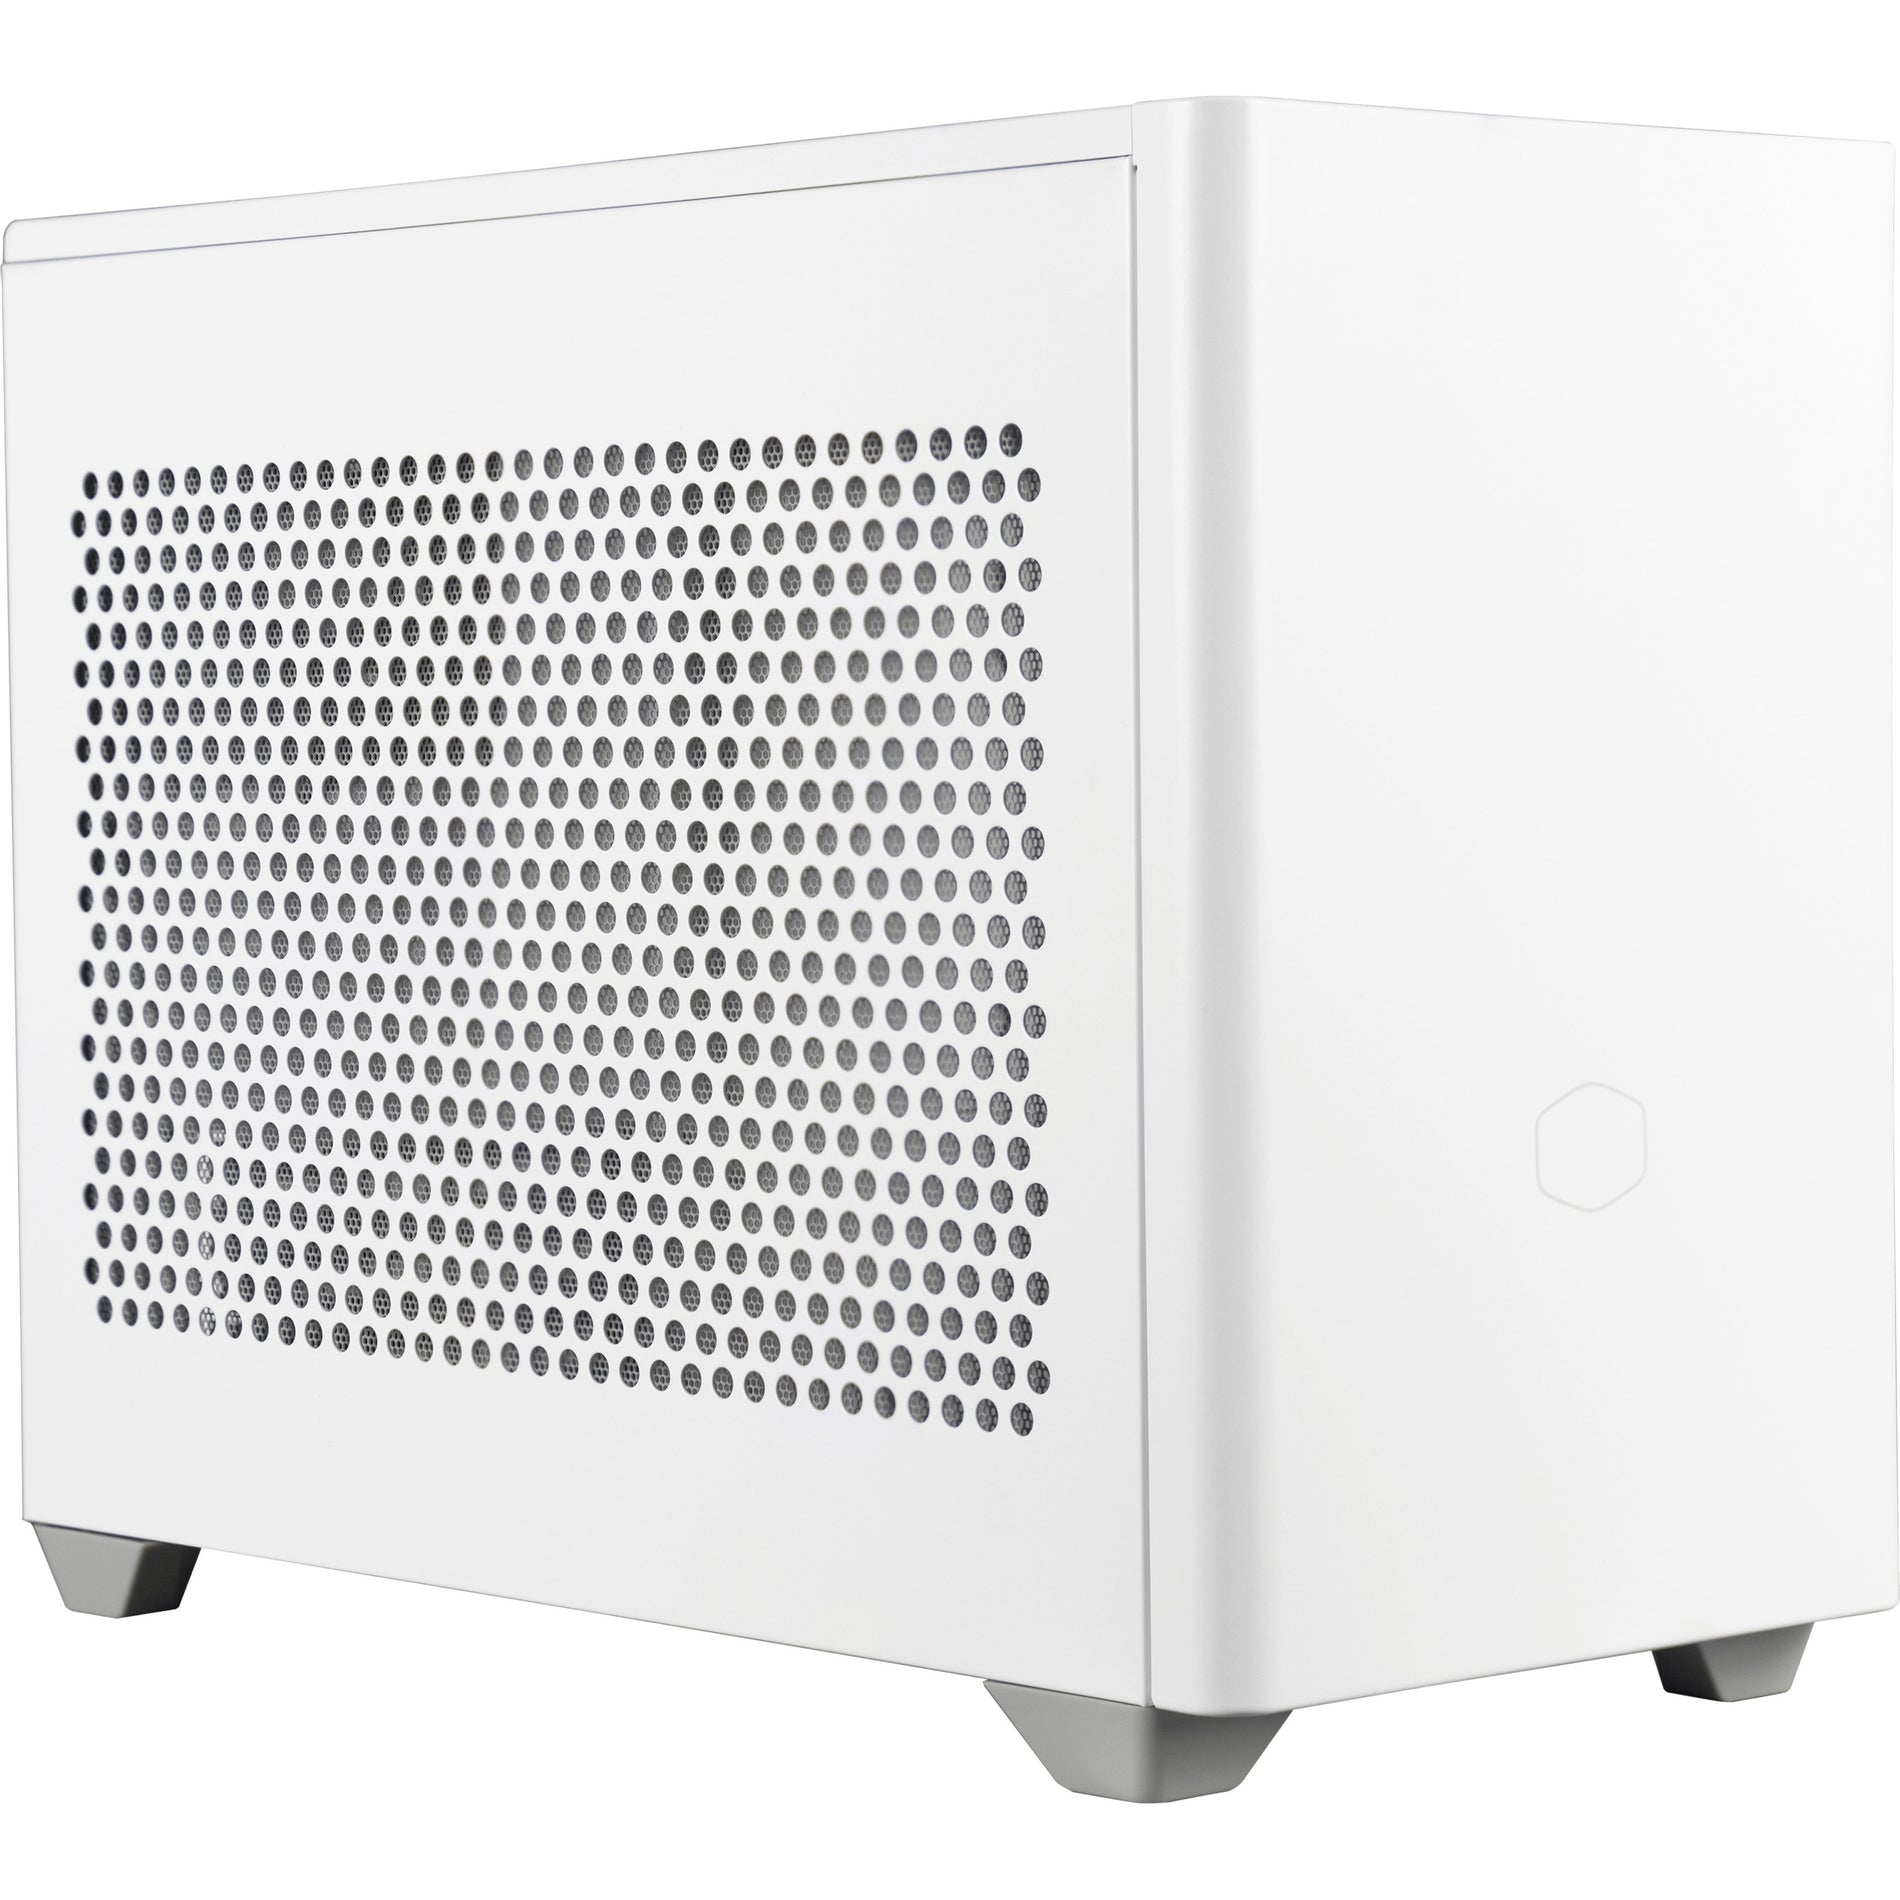 Cooler Master MCB-NR200-WNNN-S00 MasterBox Computer Case, Compact Design, 2.5" and 3.5" Internal Bays, 3 Expansion Slots, USB Ports, White